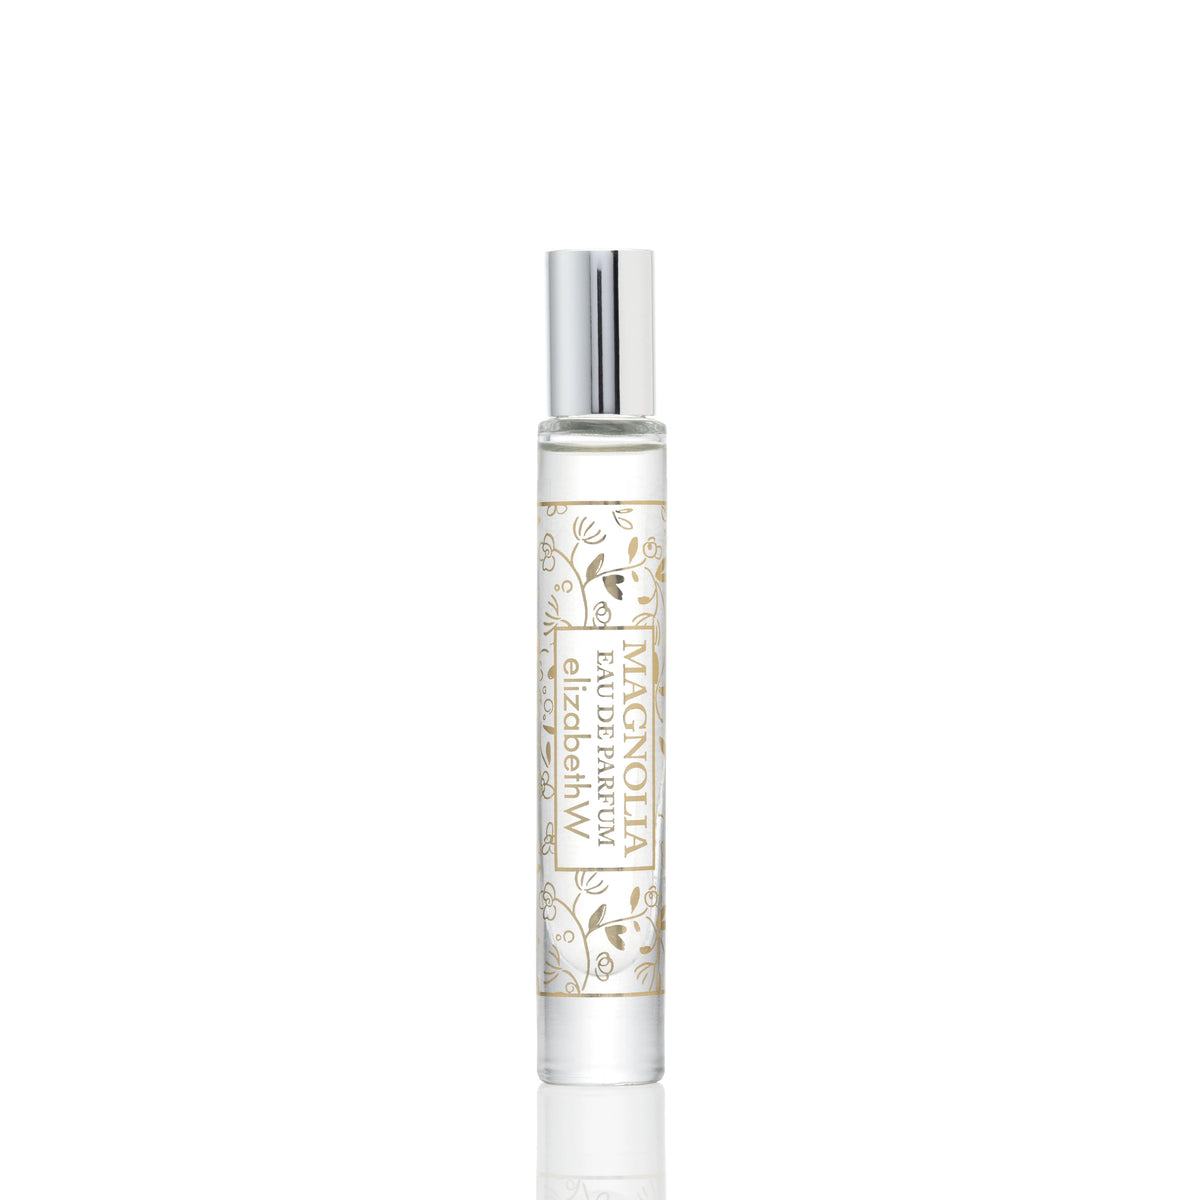 A vertical image displaying a sleek, travel-sized perfume spray bottle with a metallic cap on a white background. The bottle showcases elegant gold floral designs and script text. It is Elizabeth W's elizabeth W Signature Magnolia Rollerball.